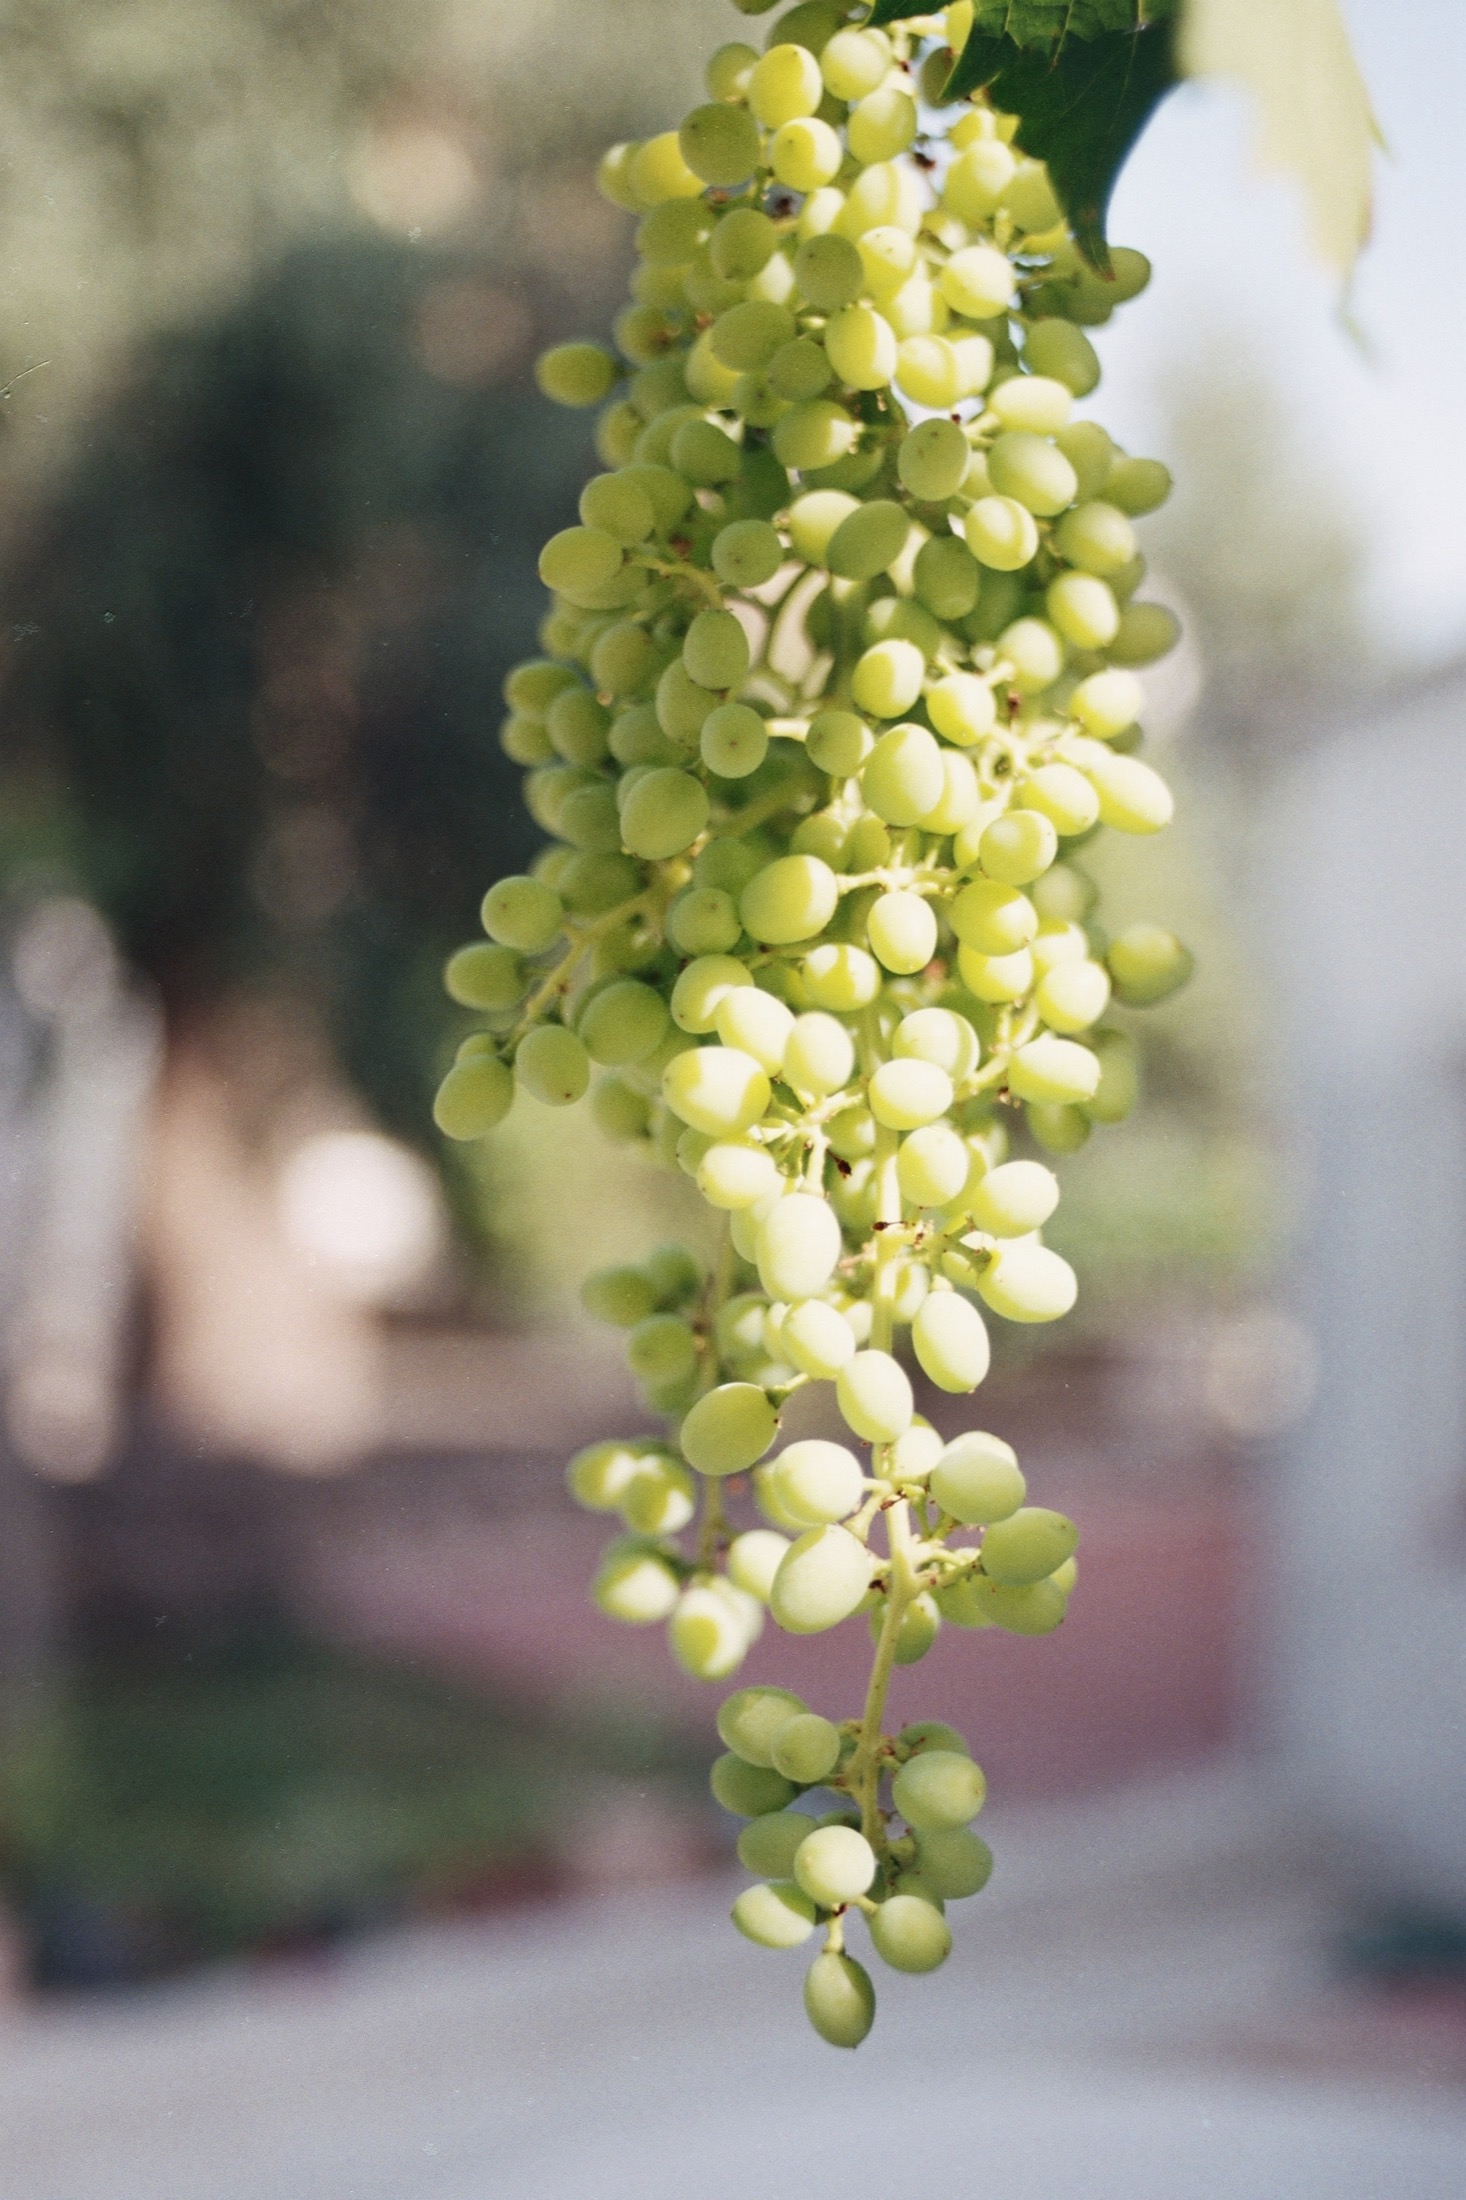 Green grapes on their vine in the sun